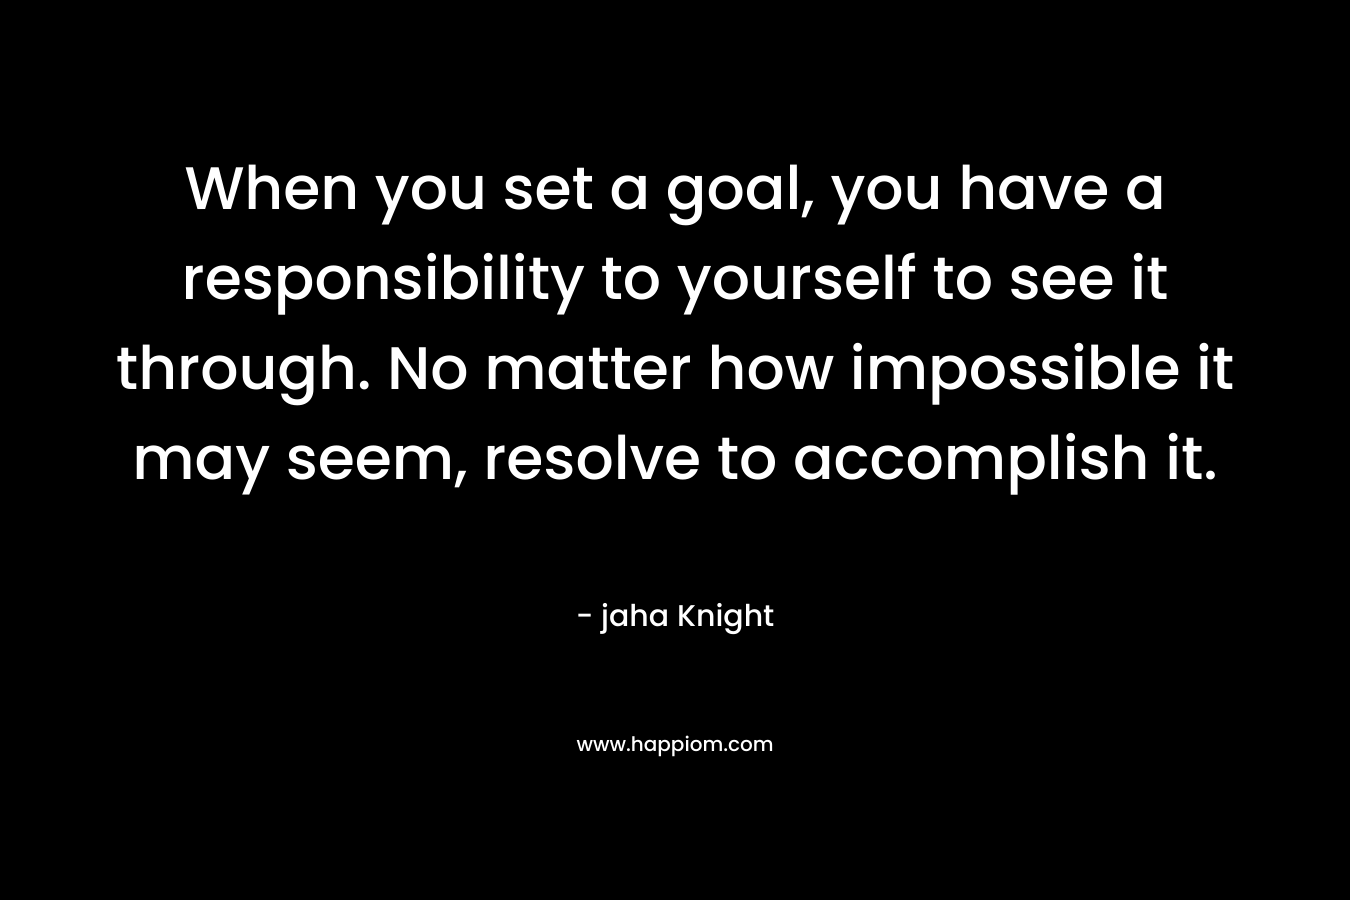 When you set a goal, you have a responsibility to yourself to see it through. No matter how impossible it may seem, resolve to accomplish it. – jaha Knight